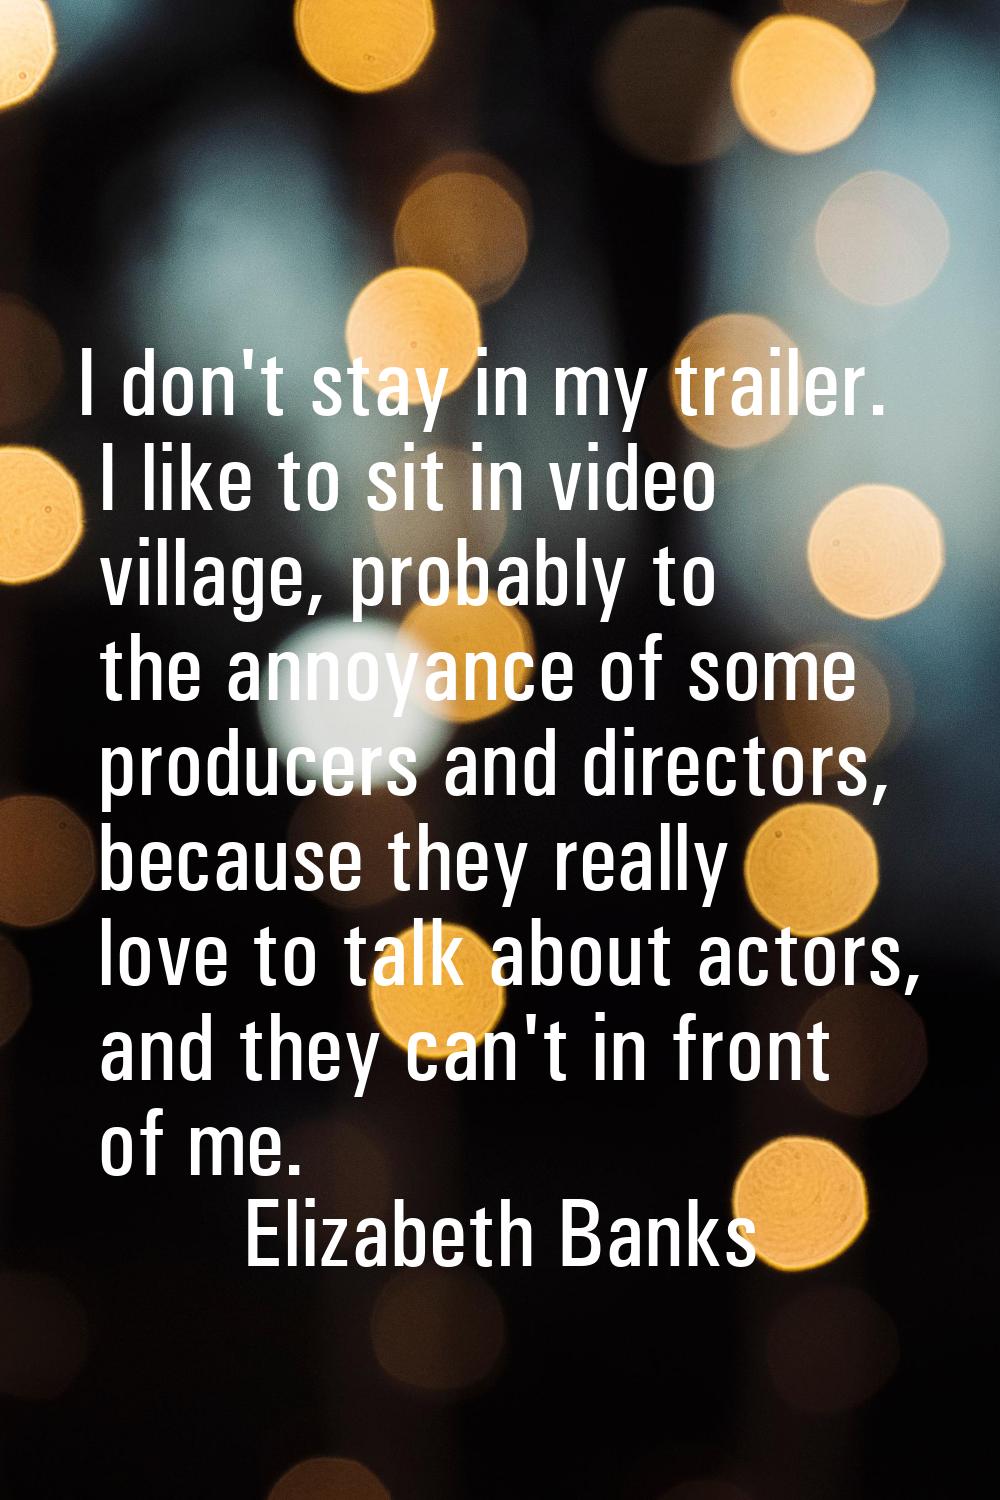 I don't stay in my trailer. I like to sit in video village, probably to the annoyance of some produ